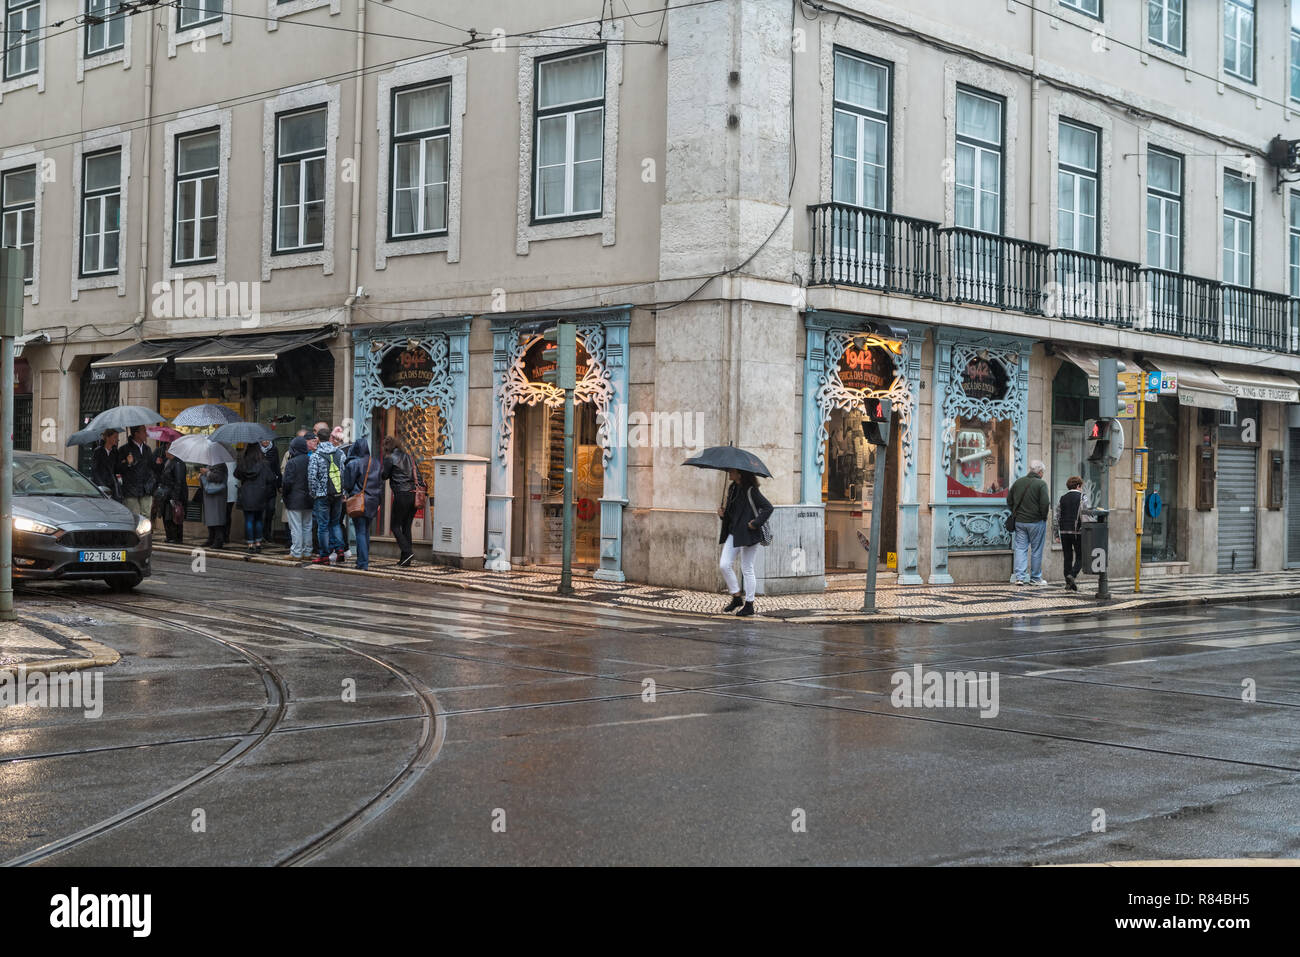 People at the Lisbon Old Town street. Lisbon is the capital of Portugal. Stock Photo